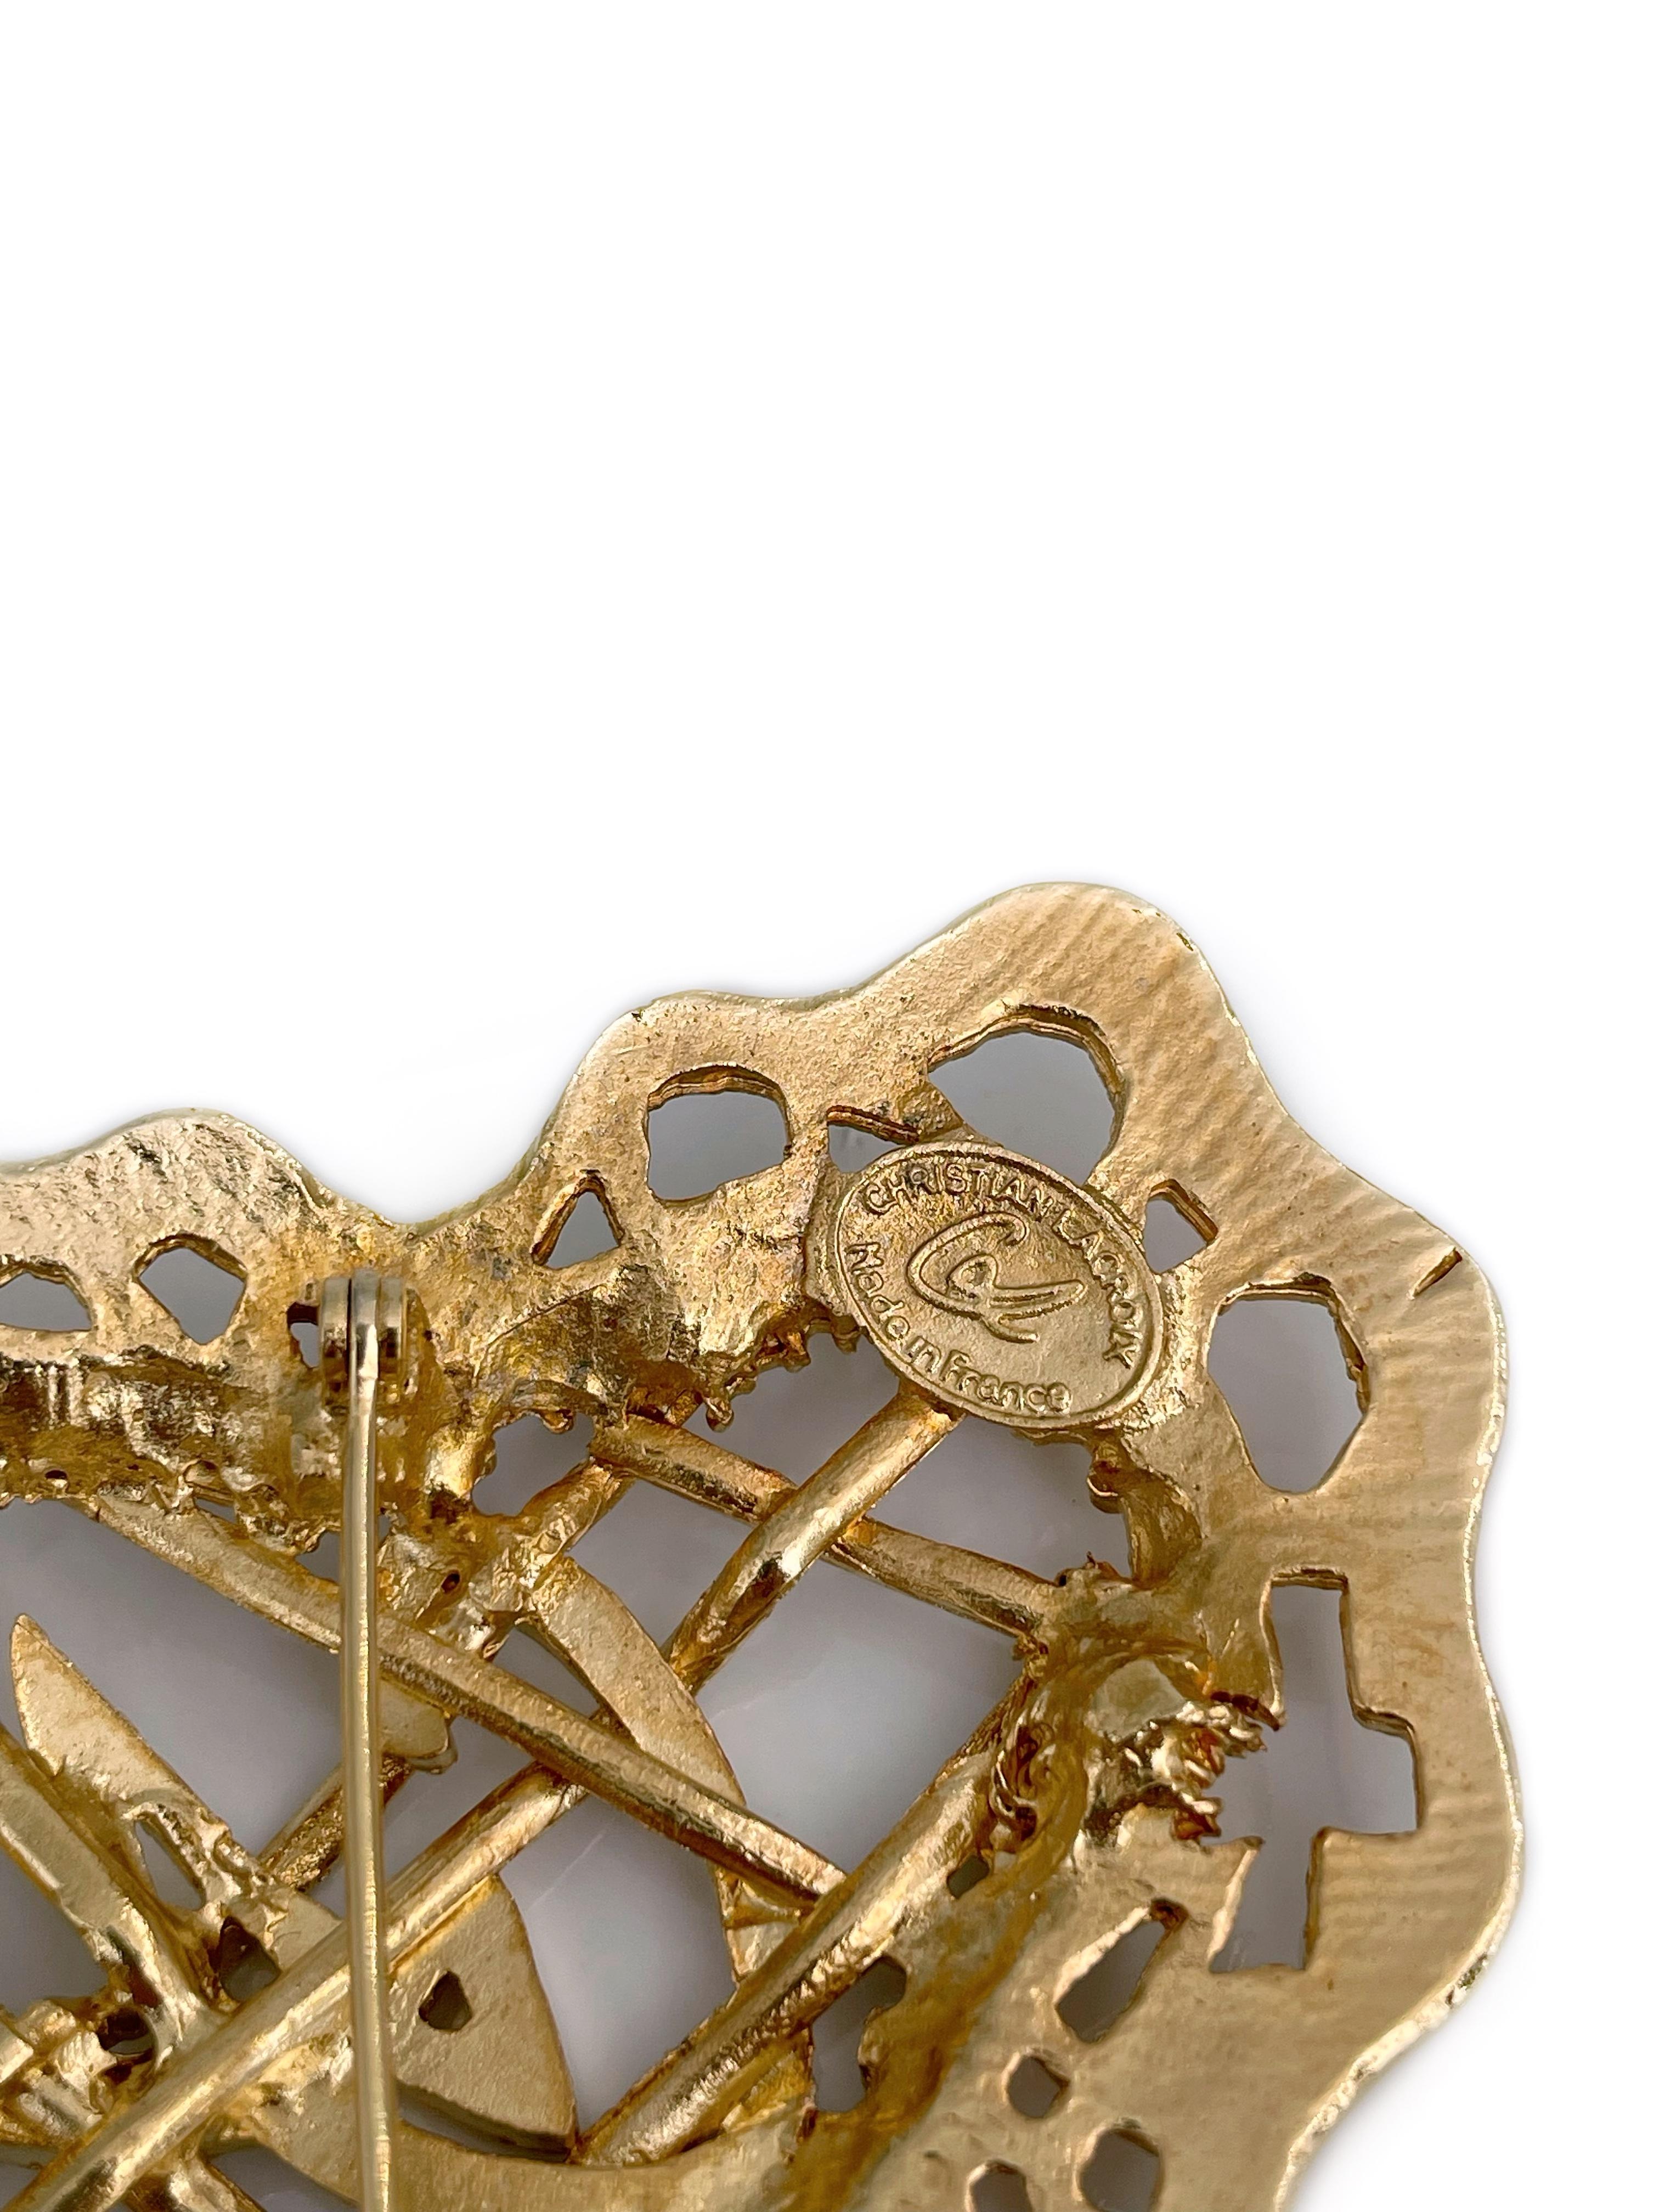 Women's 1990s Vintage Christian Lacroix Gold Tone Openwork Design CL Heart Pin Brooch For Sale